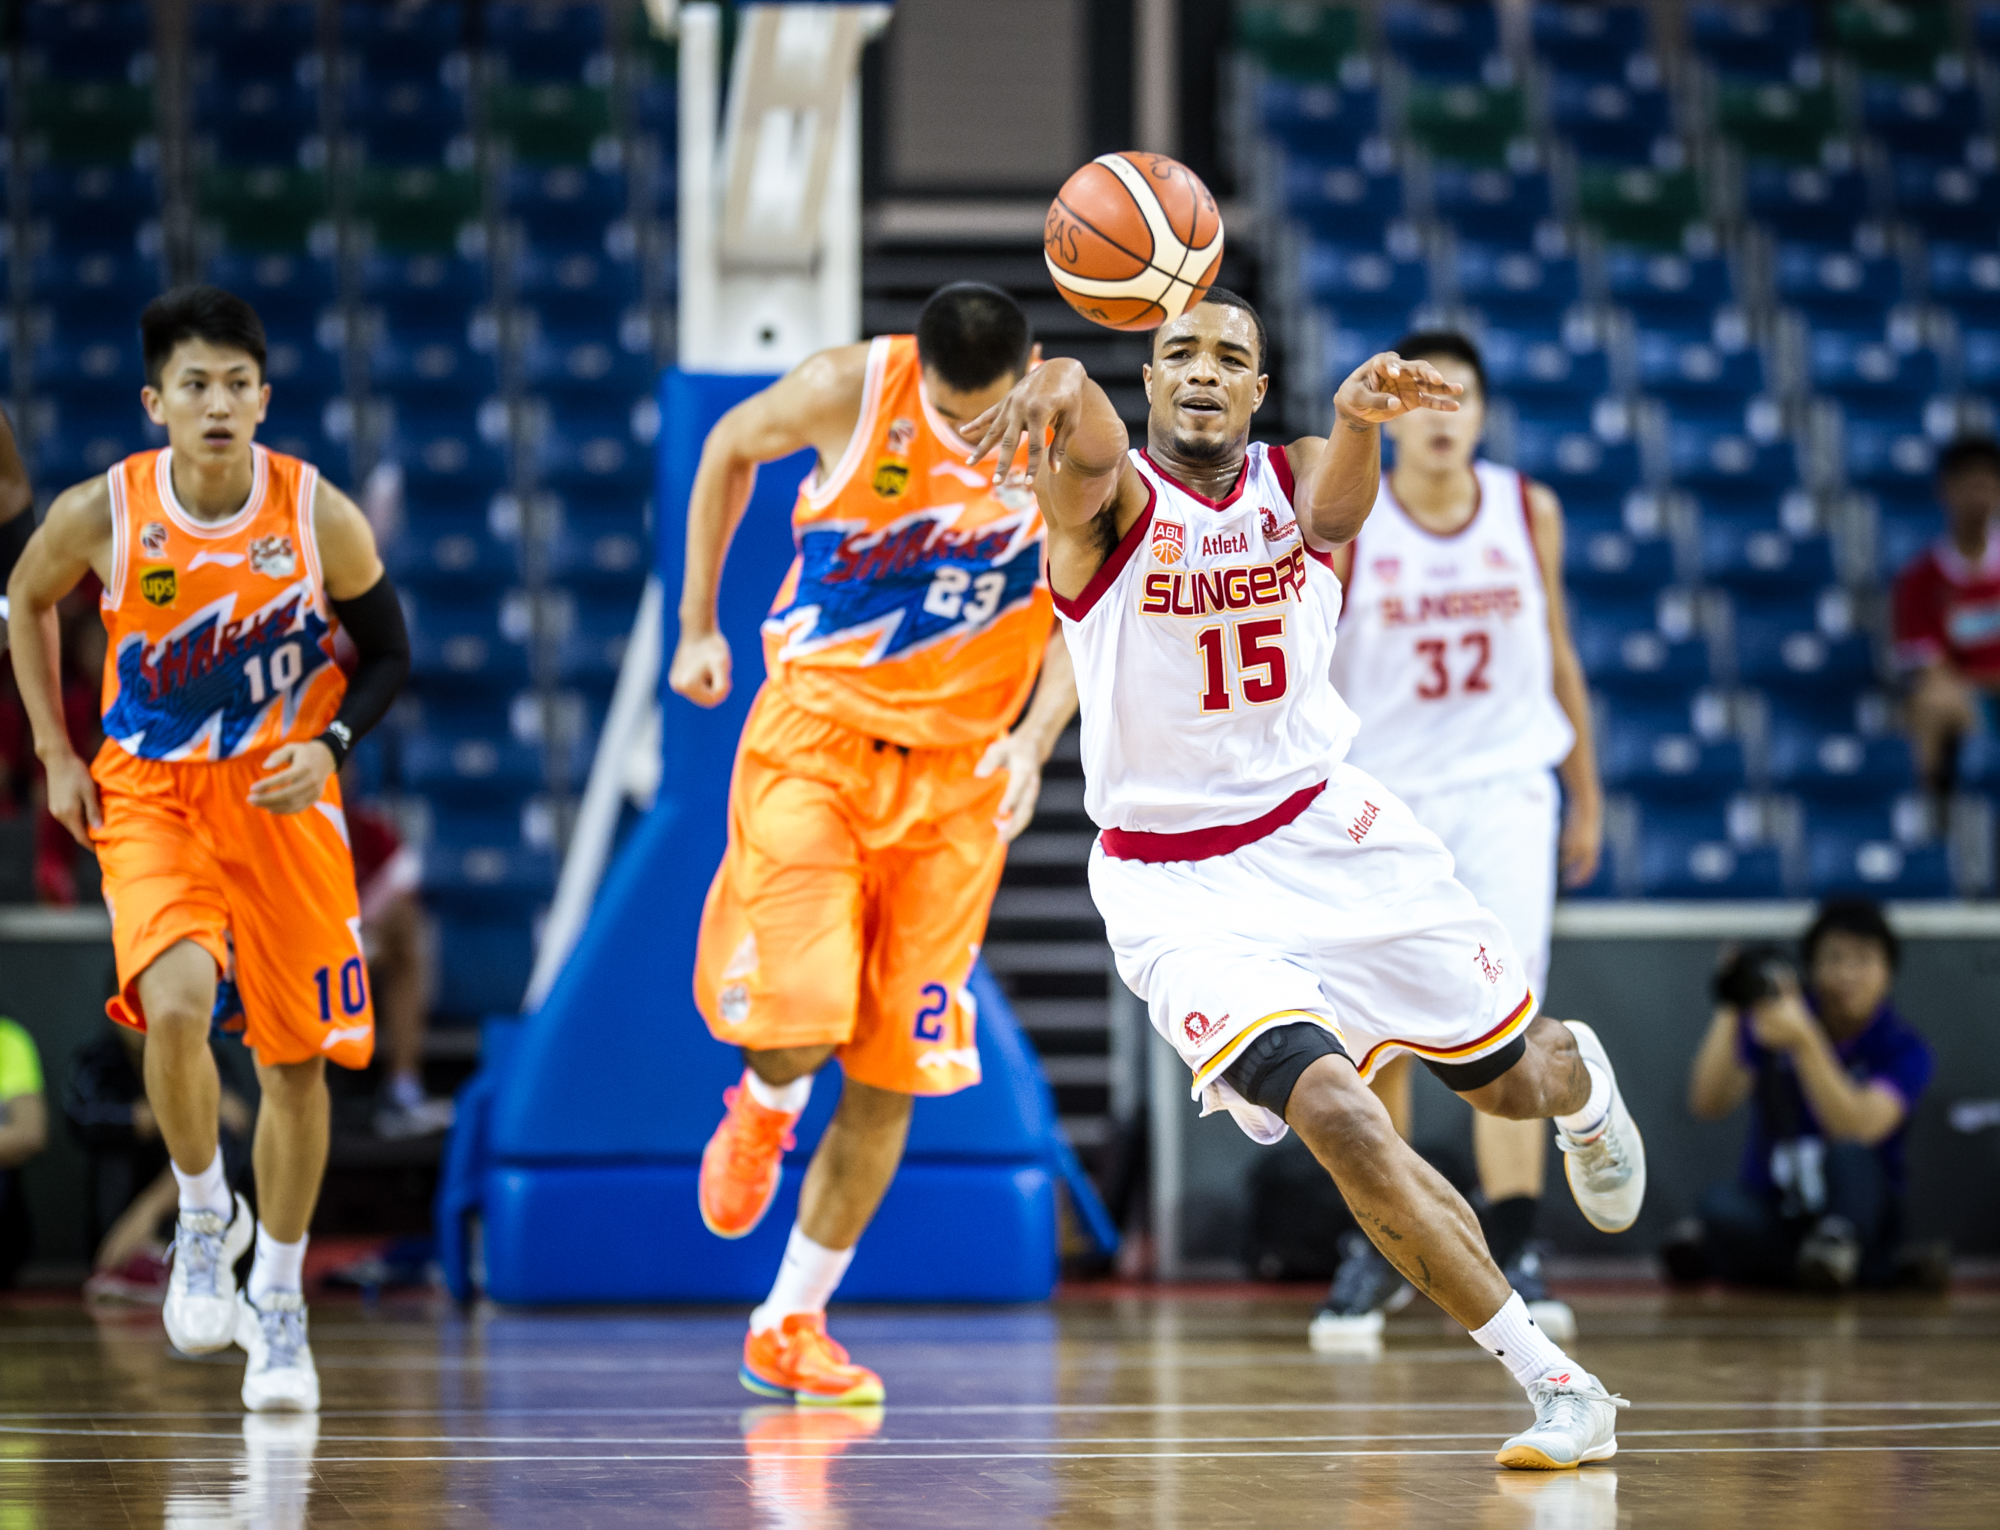 A Singapore Basketball player passes the ball during the Merlion Cup basketball competition at the OCBC Arena.